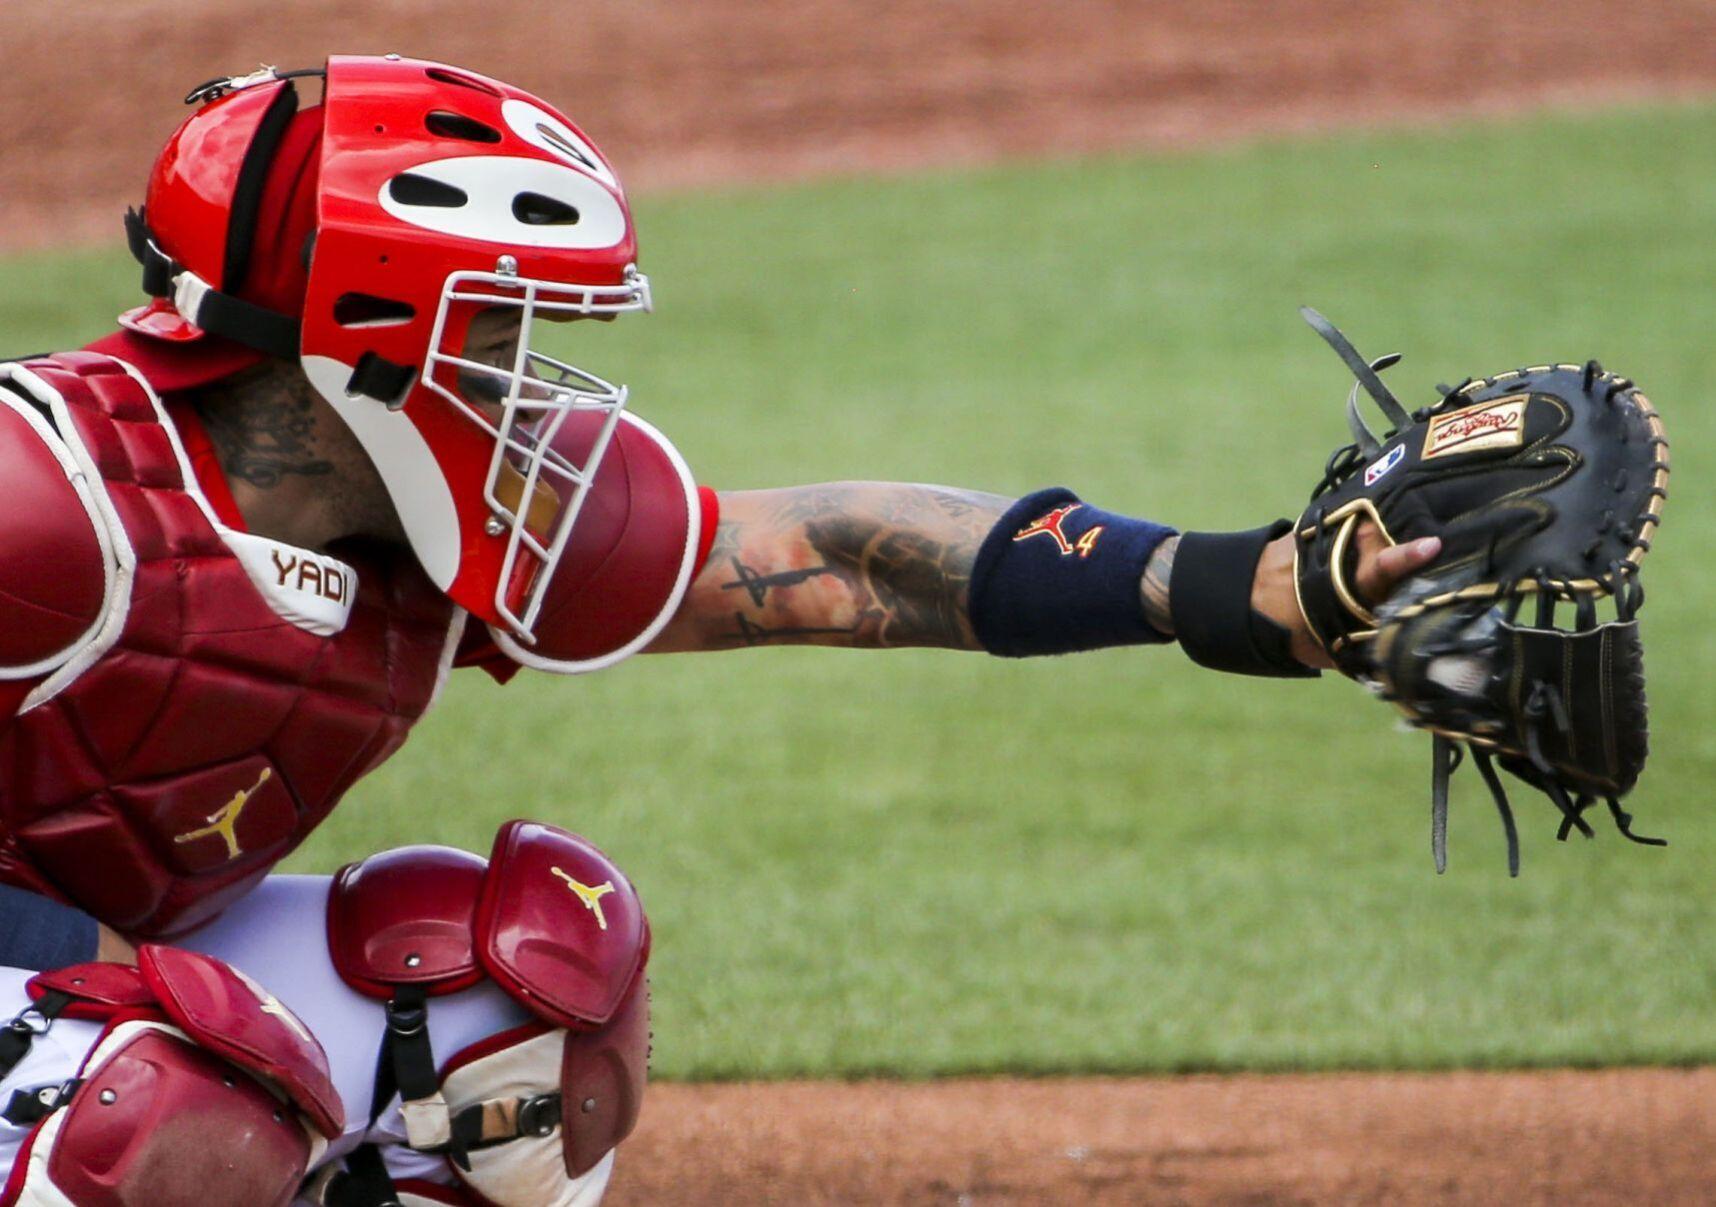 Molinas are baseball's first family of catchers